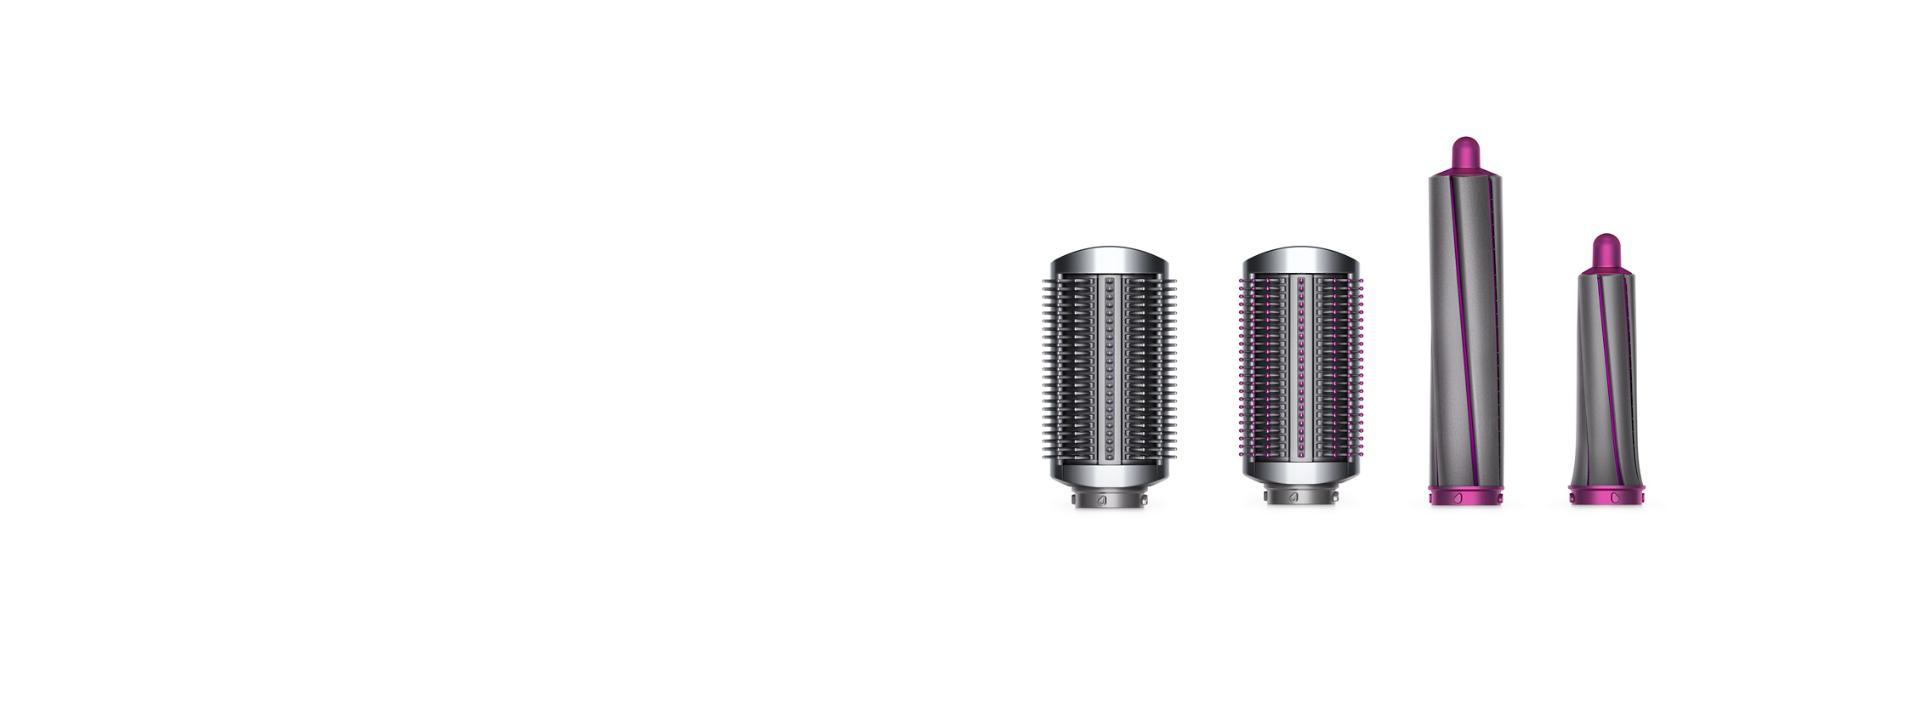 Line up of Dyson Airwrap™ styler attachments